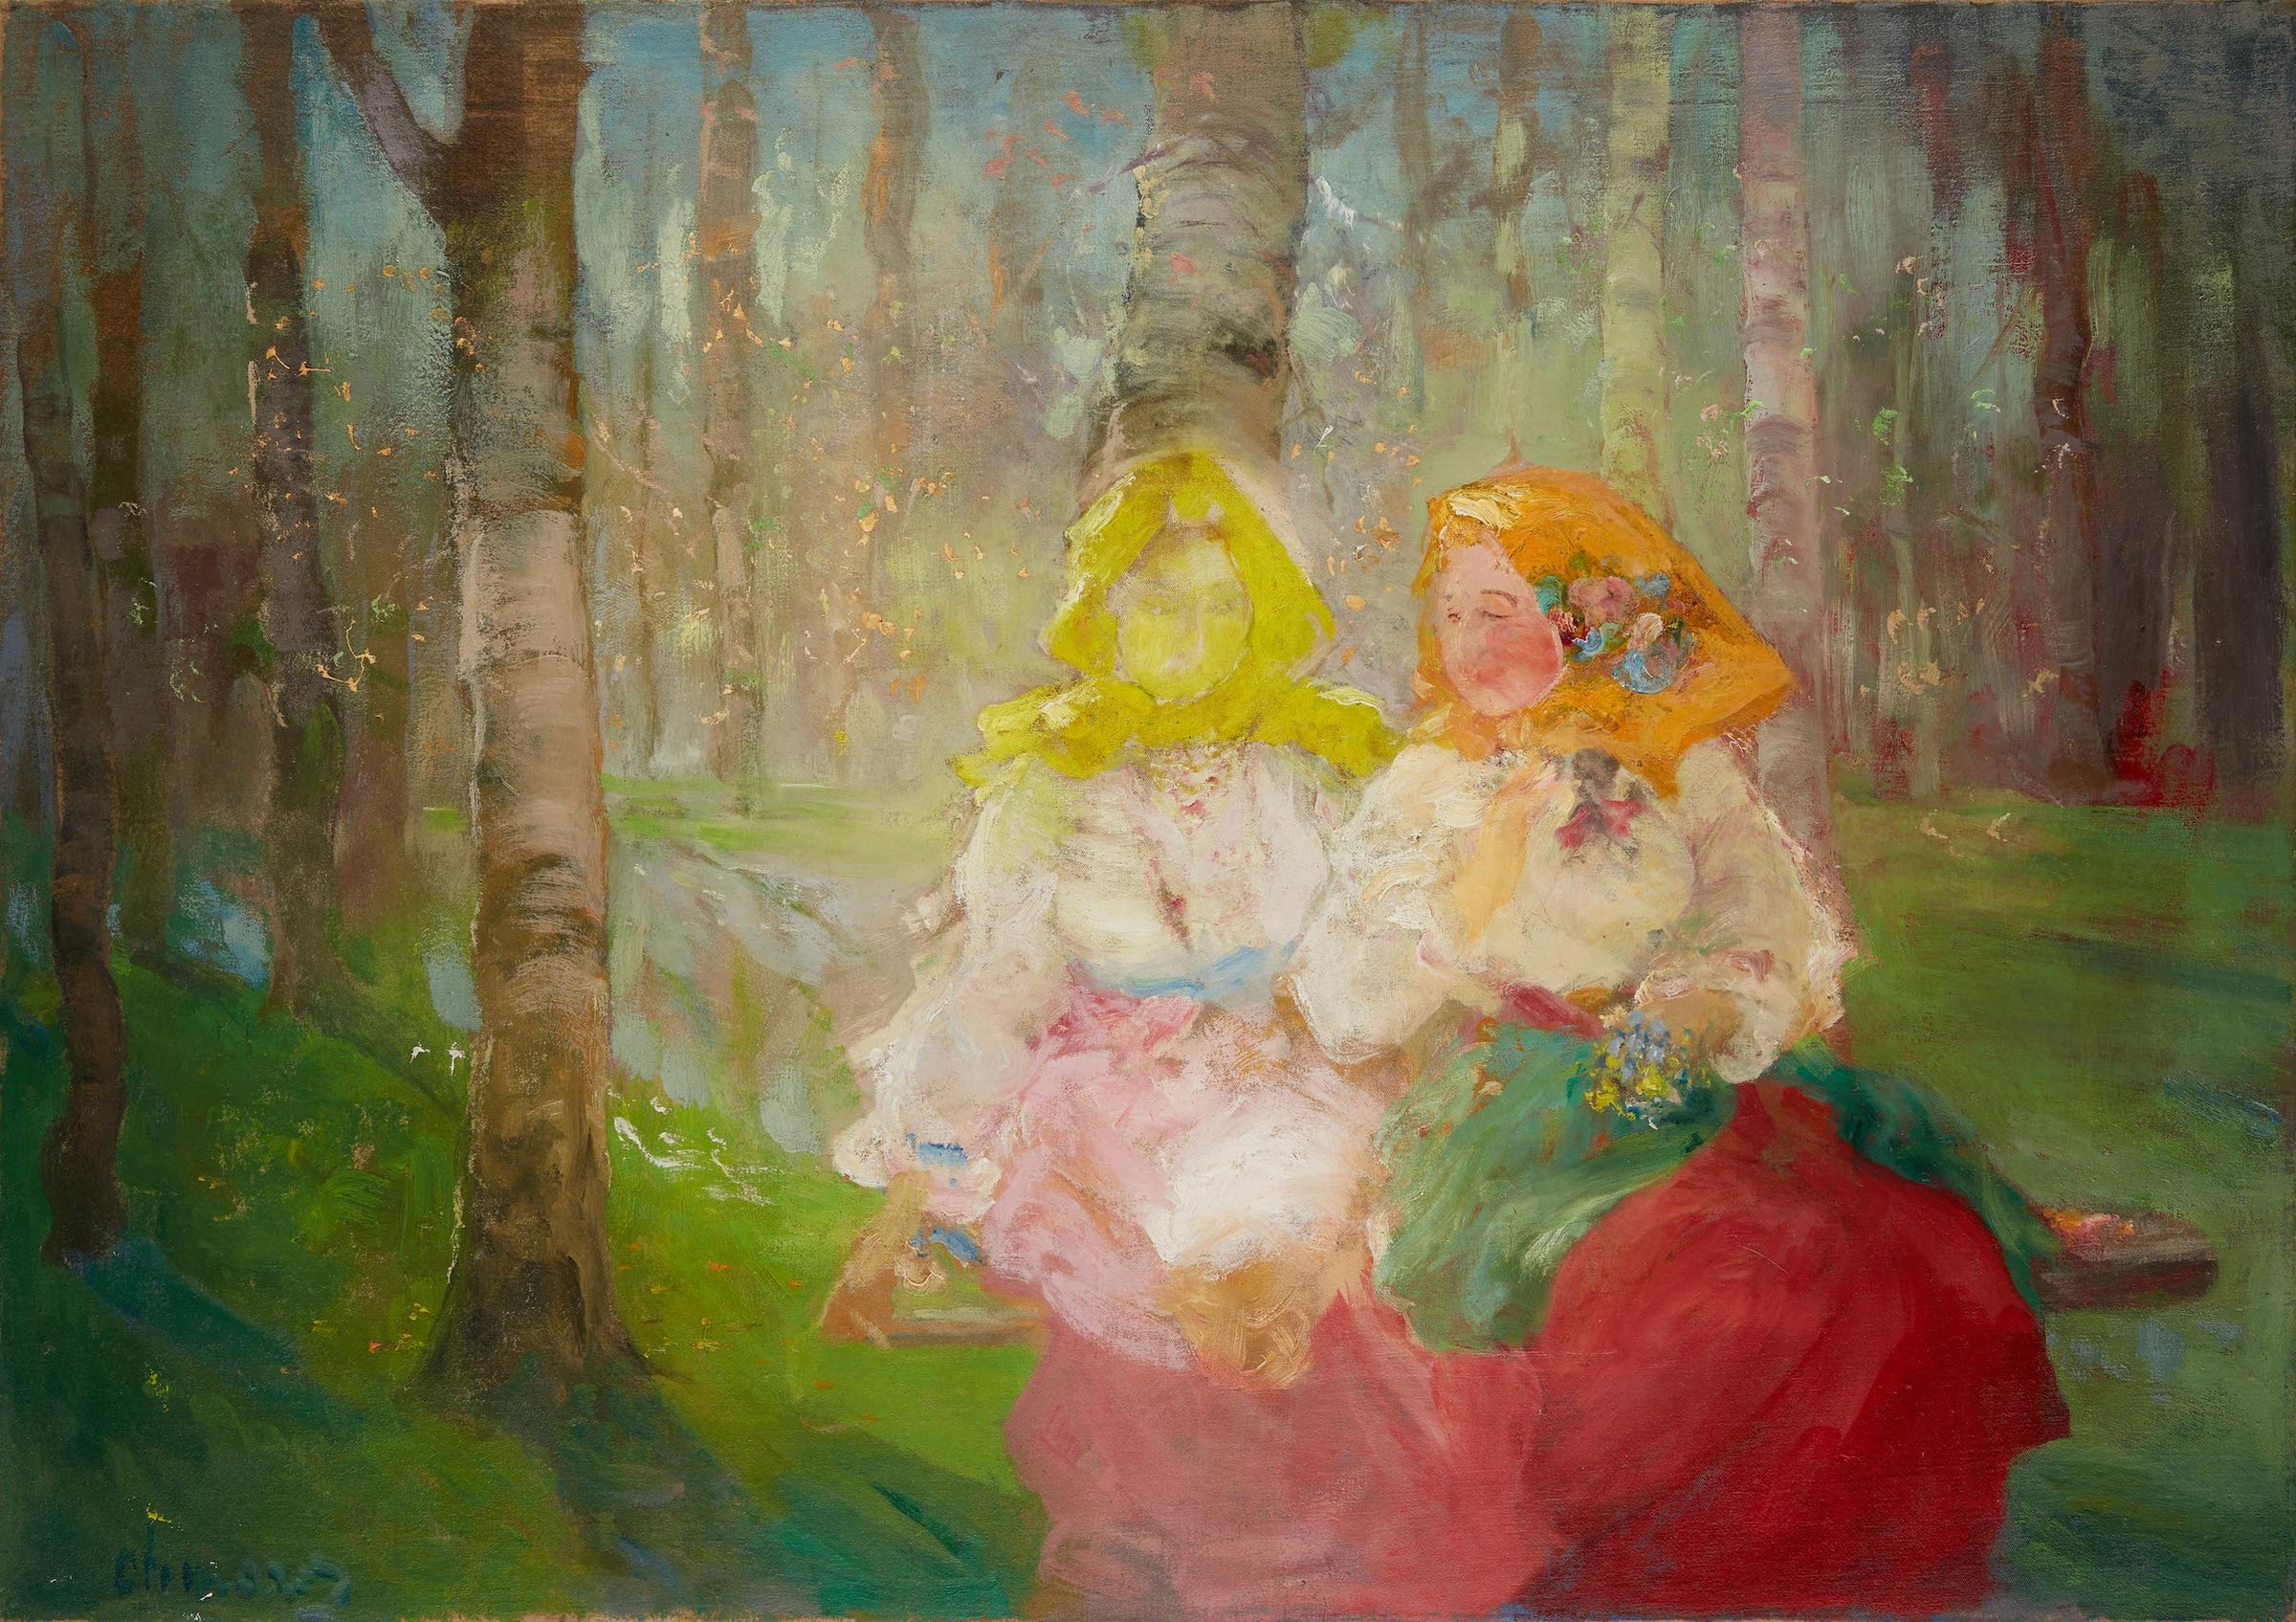 Girls in a Forest